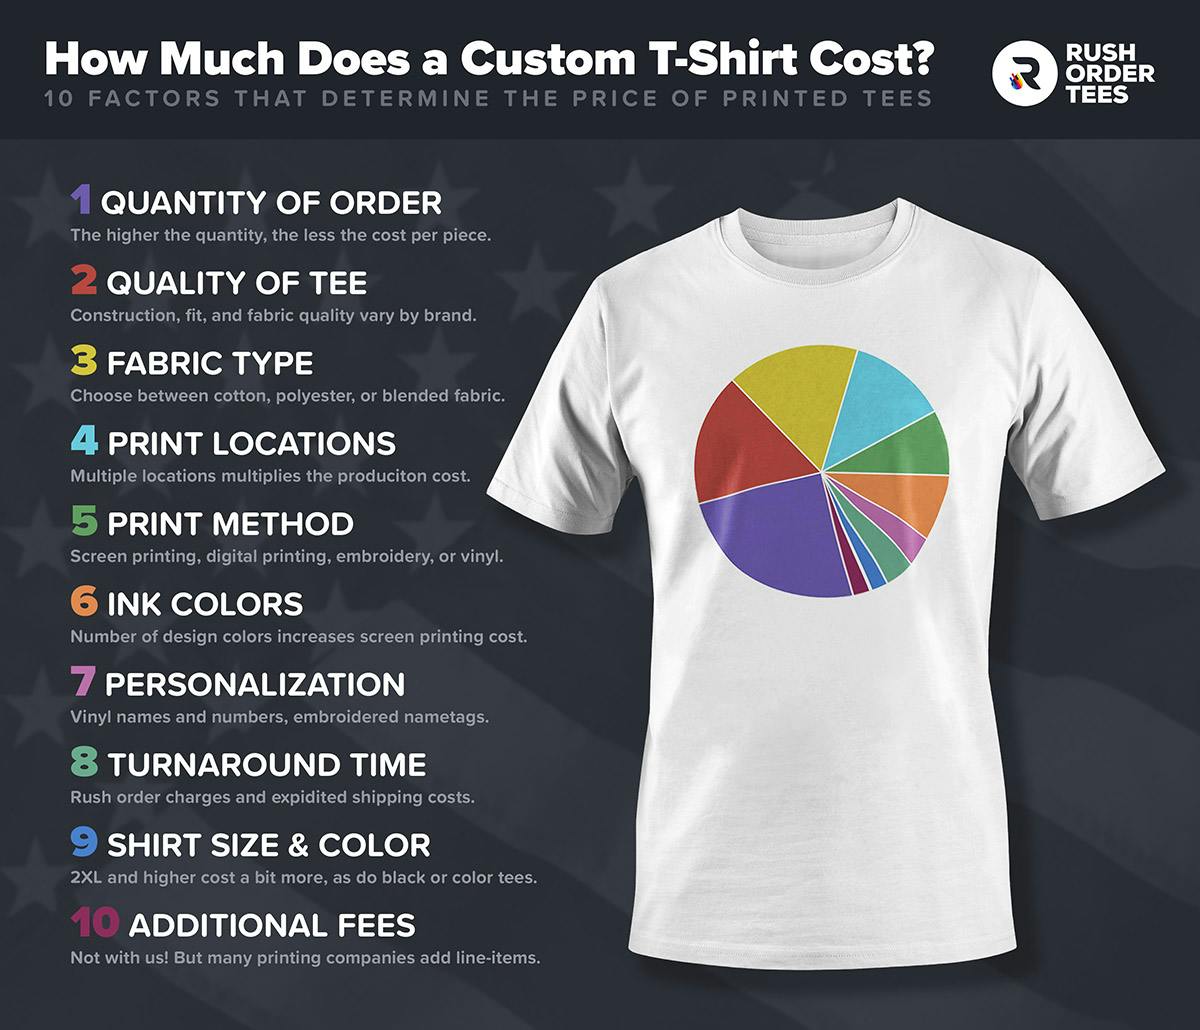 The top 10 factors that determine the cost of custom t-shirts.